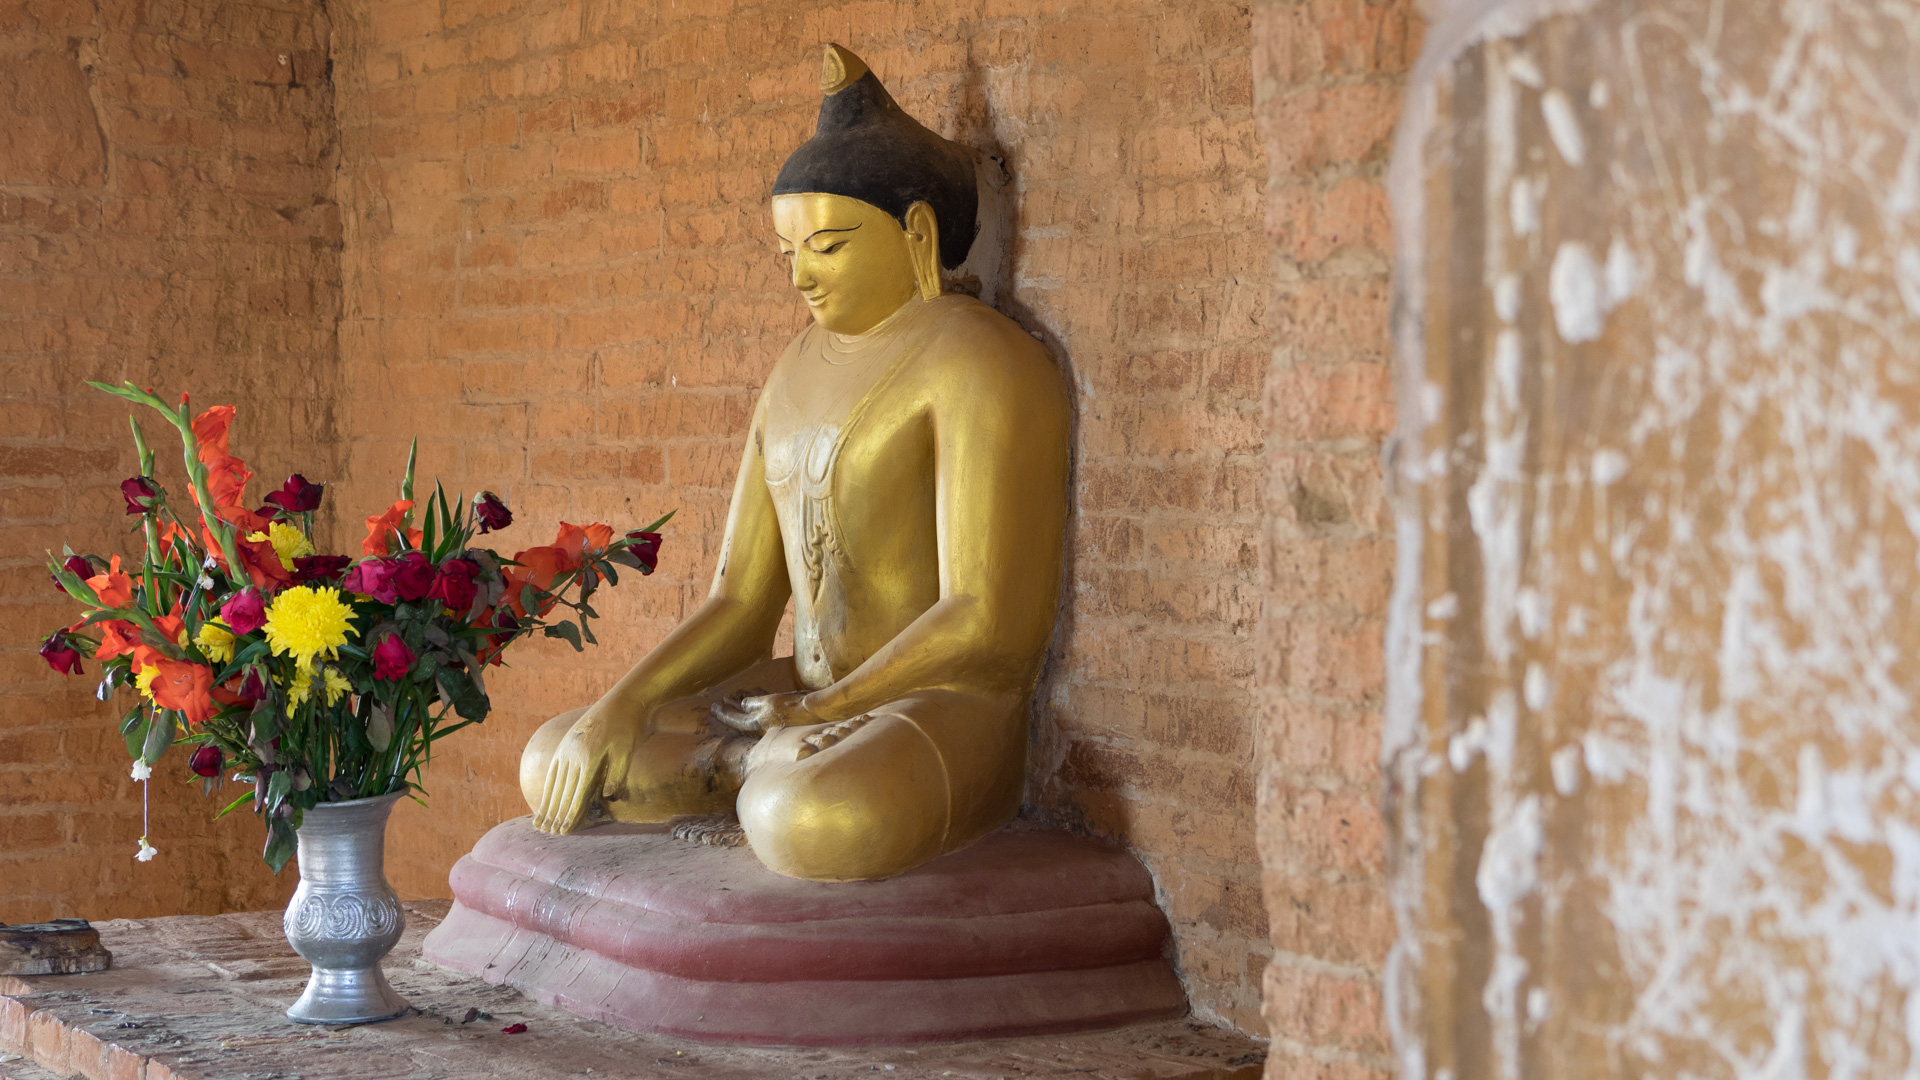 Buddha statue in one of the many temples in Old Bagan